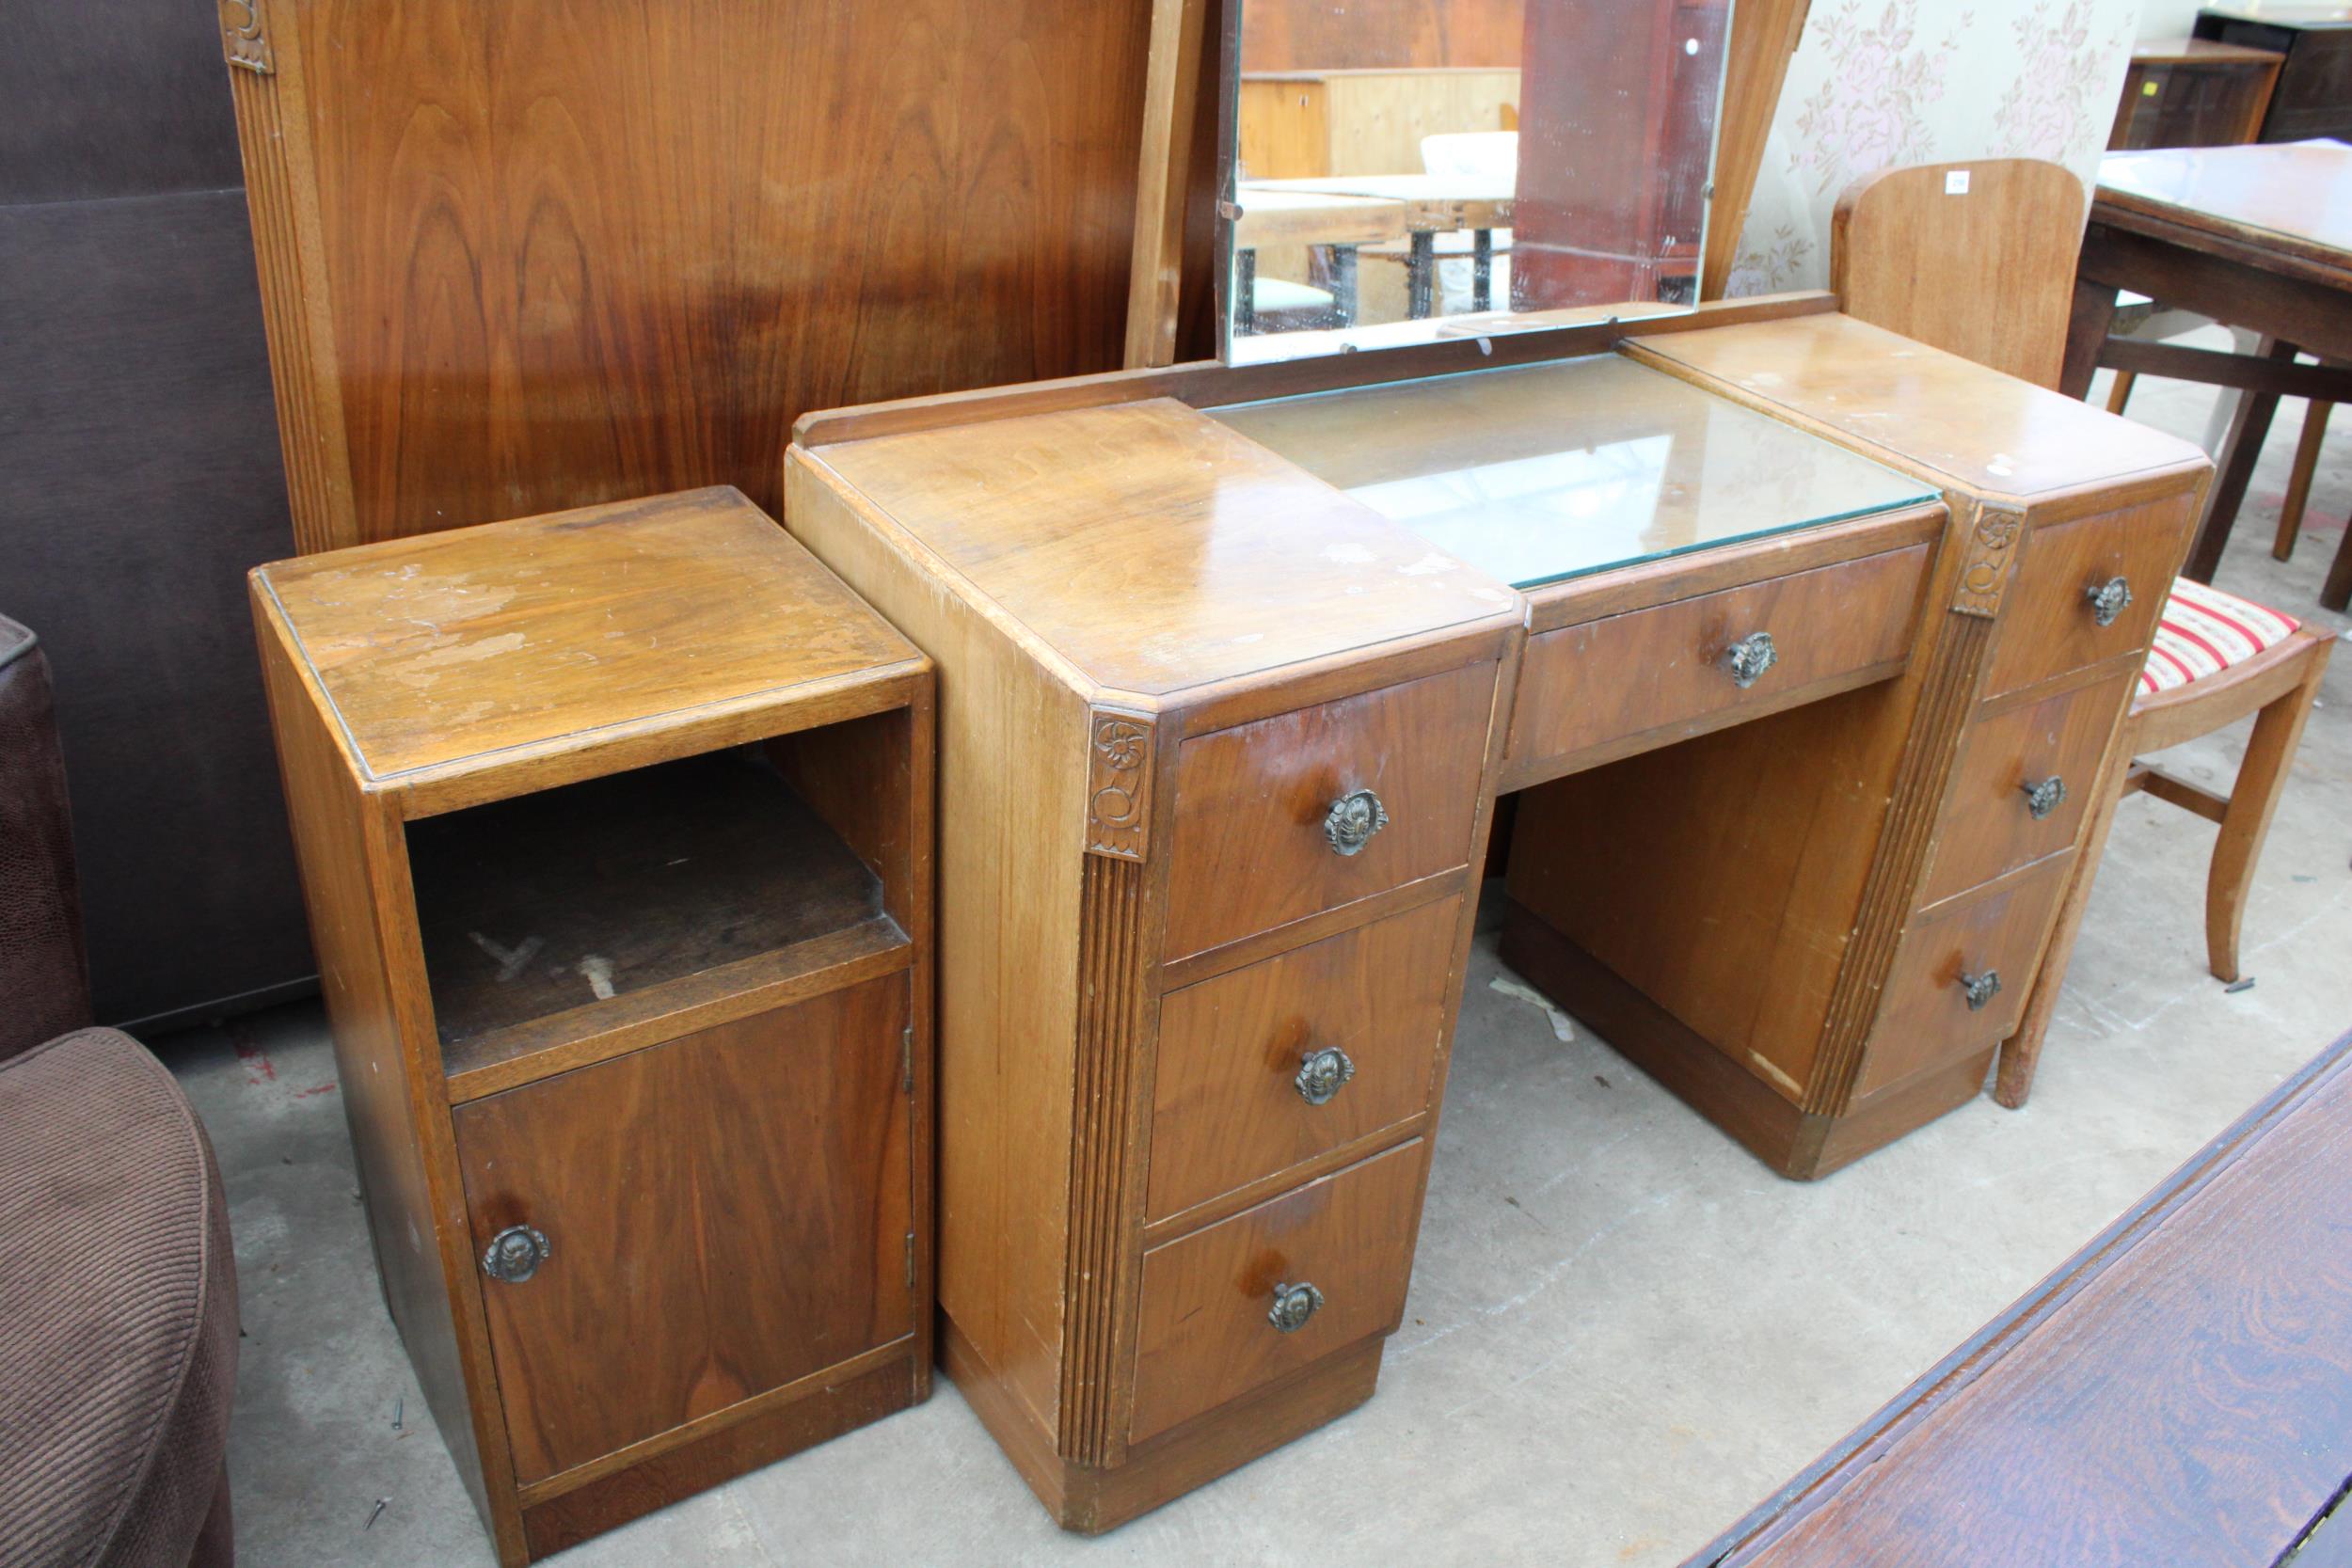 A MID 20TH CENTURY WALNUT DRESSING TABLE, BEDSIDE LOCKER, BEDSTEAD AND SIMILAR CHAIR - Image 2 of 2